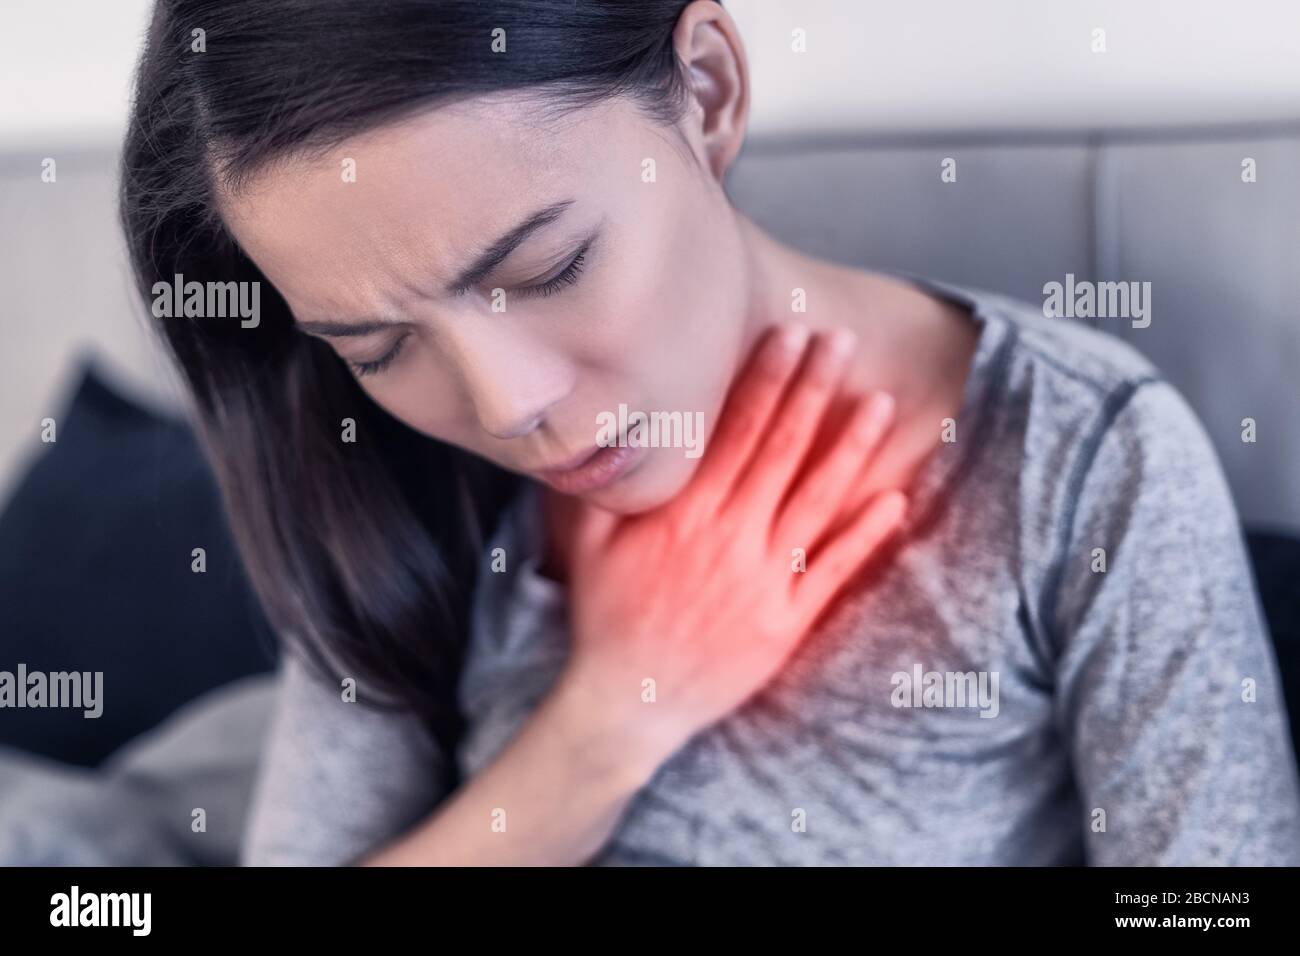 COVID-19 Corona virus symptoms are pneumonia, shortness of breath, fever, body aches or breathing difficulties. Asian woman sick of Coronavirus with red area showing pain. Stock Photo